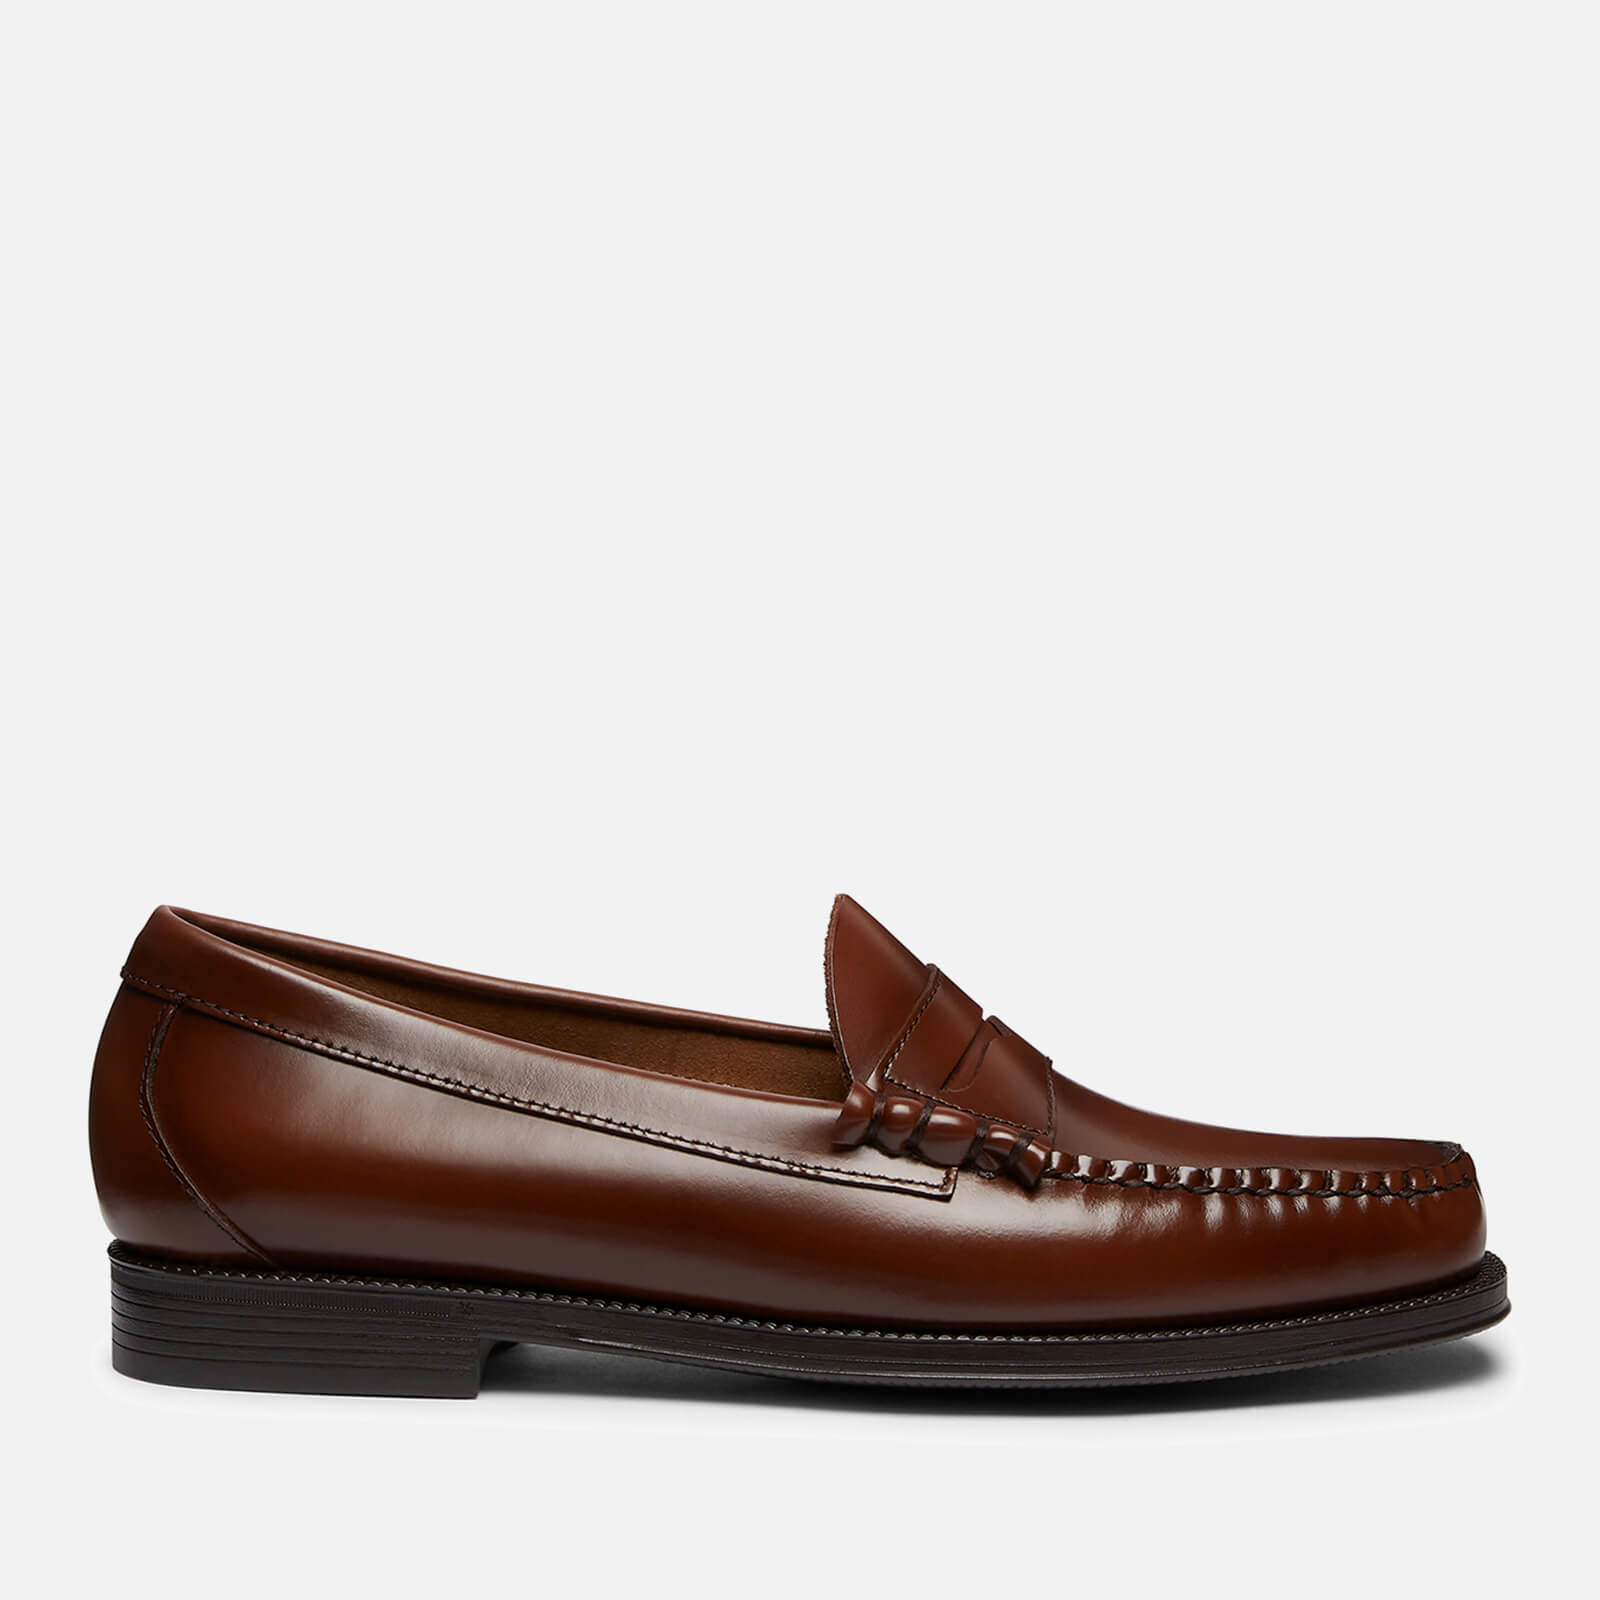 G.H Bass Men’s Larson Moc Leather Penny Loafers